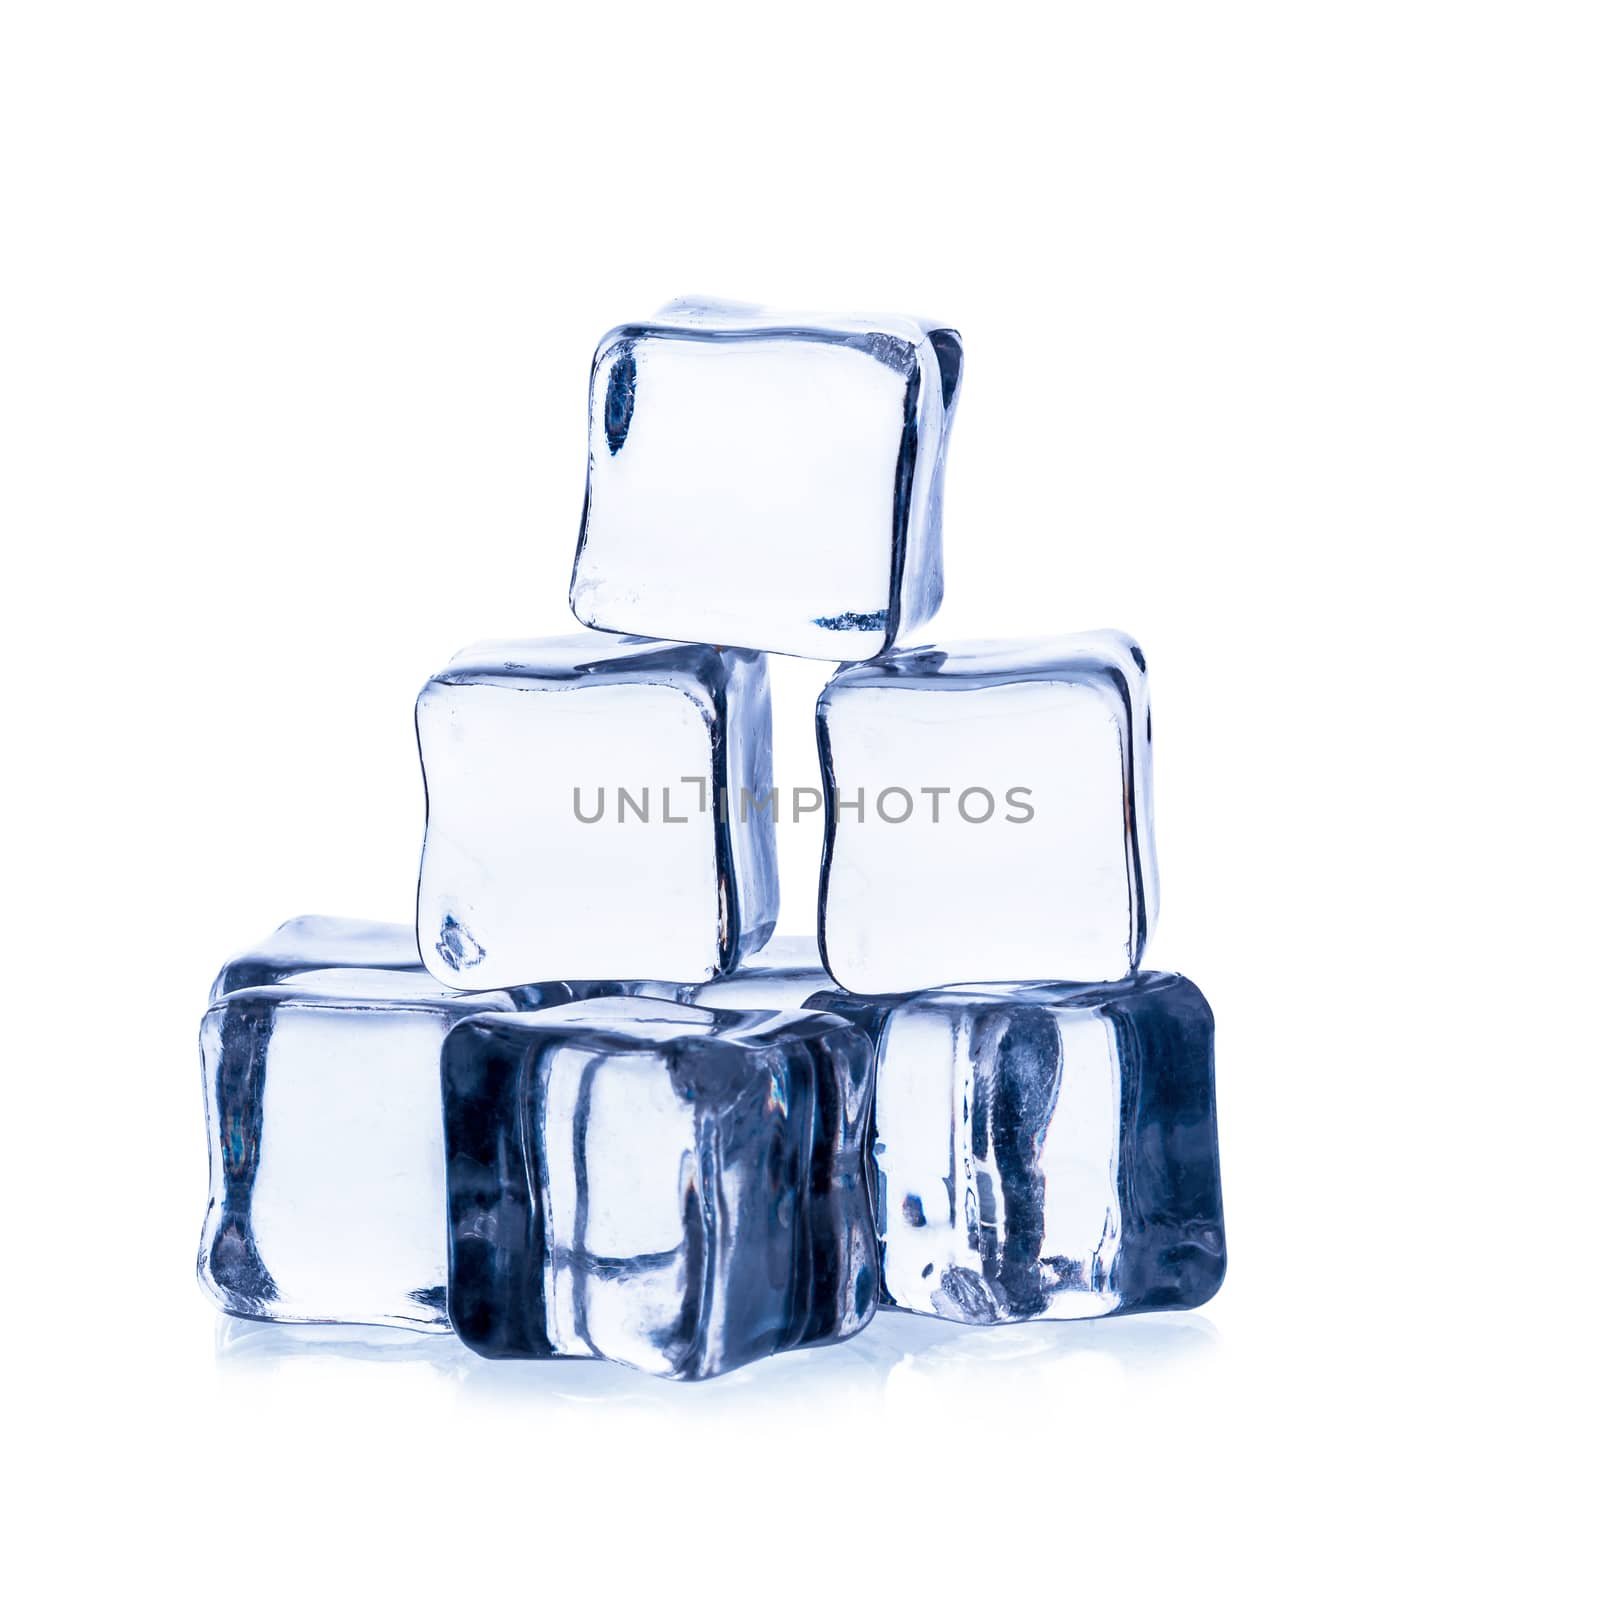 Ice cubes on a white background by kaiskynet